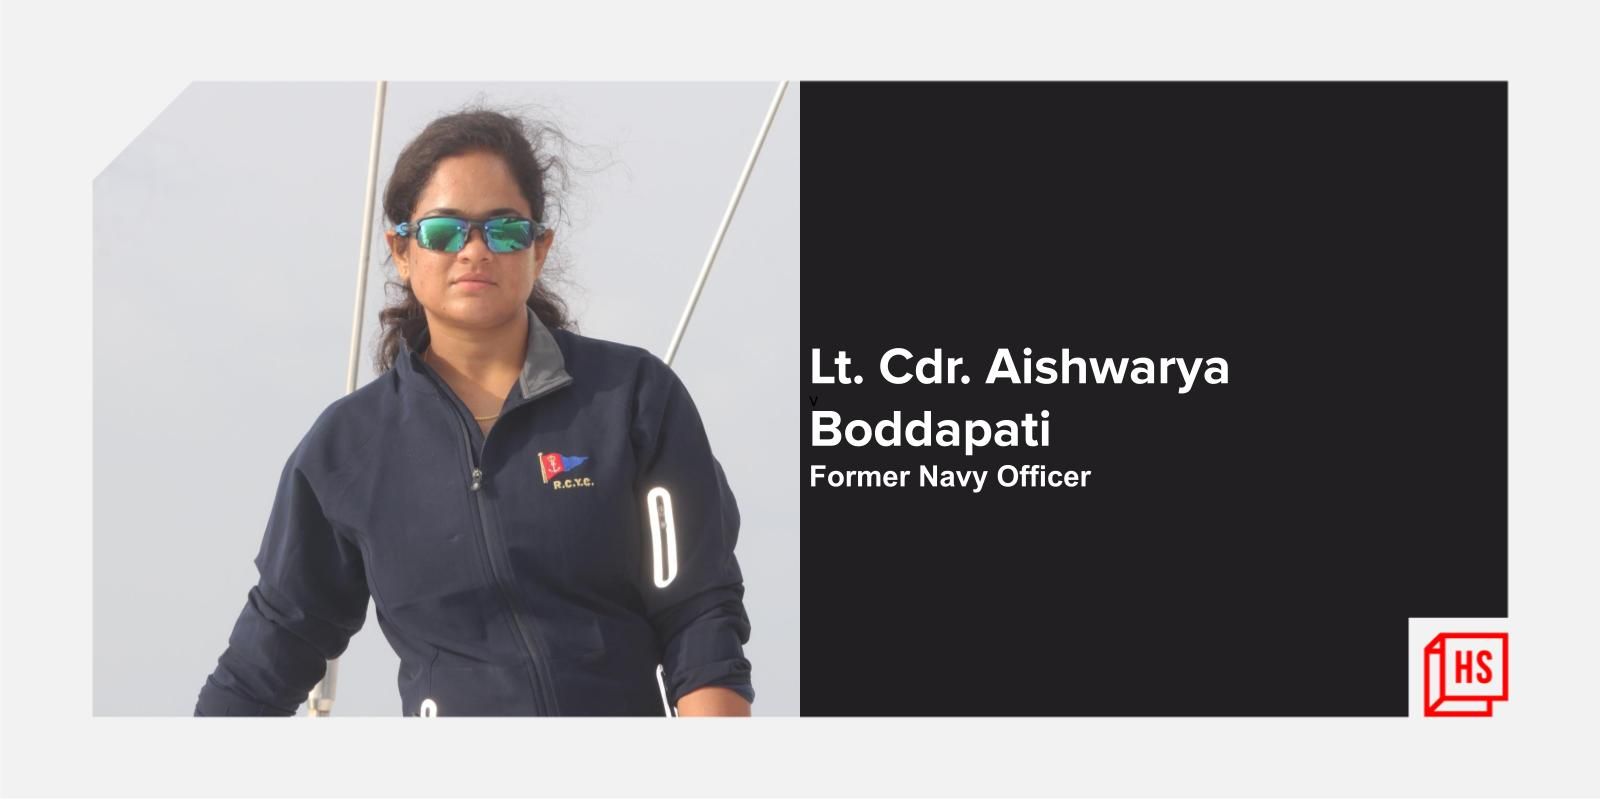 Inside the life of a woman in the Indian Navy with gallantry medal awardee Aishwarya Boddapati